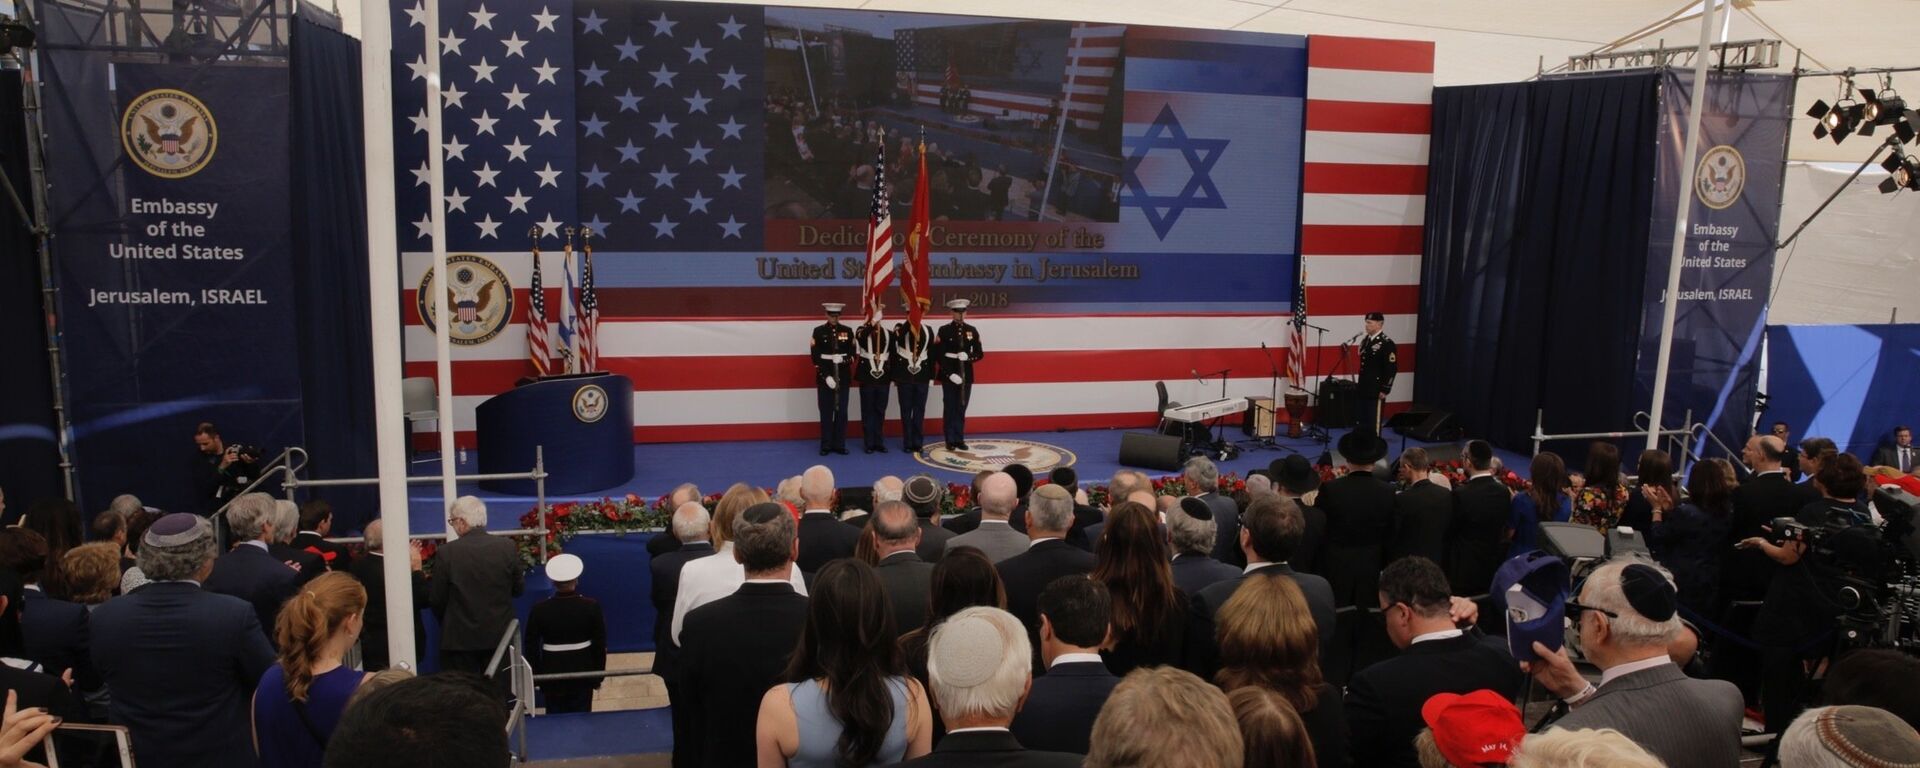 Presentation of colors by U.S Marines and singing of the U.S national anthem during the opening ceremony of the new US embassy in Jerusalem, Monday, May 14, 2018 - Sputnik International, 1920, 04.03.2019